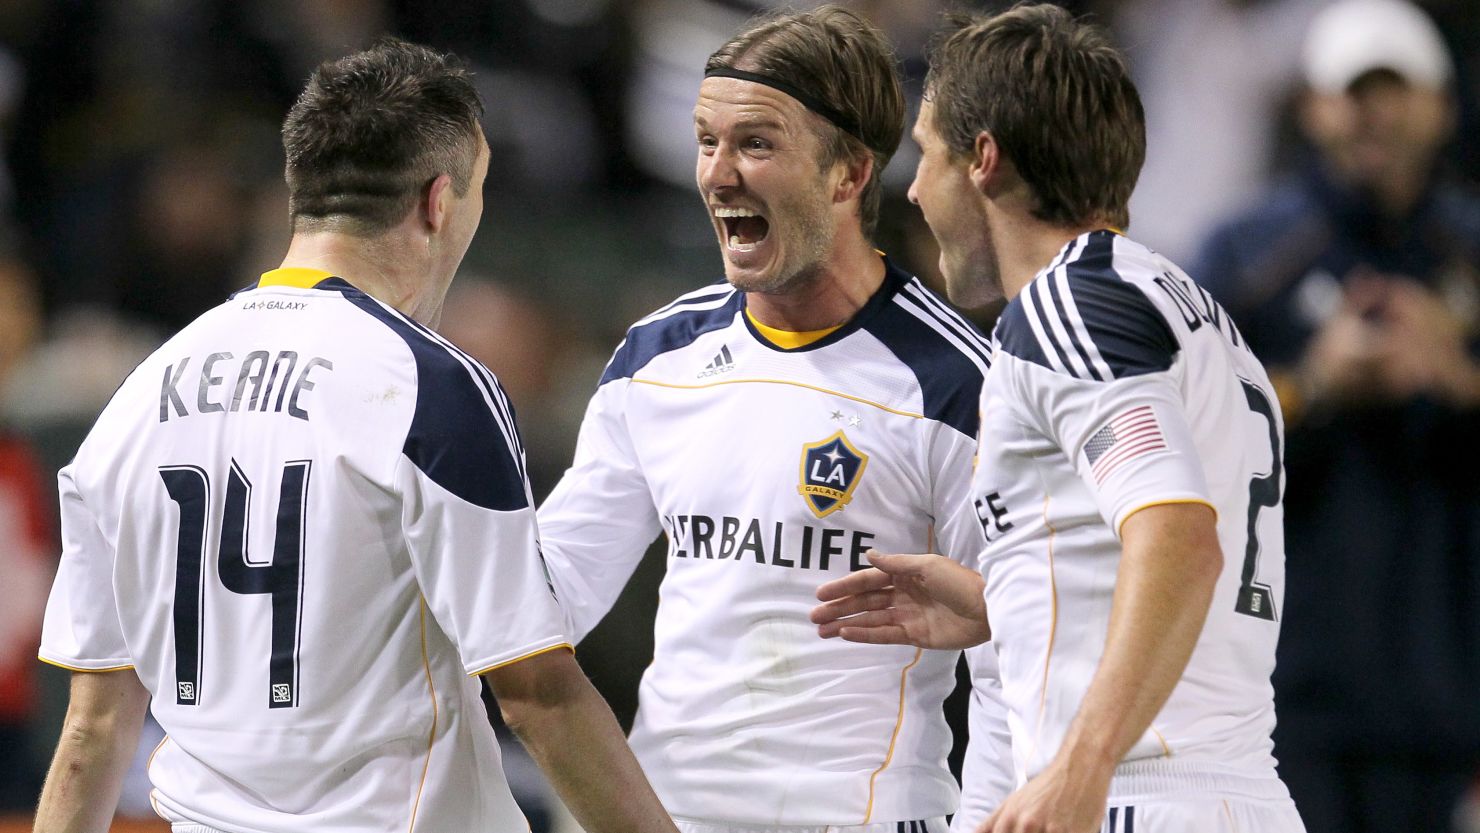 David Beckham (center) celebrates with Robbie Keane (left) during Los Angeles Galaxy's 3-1 win on Sunday.